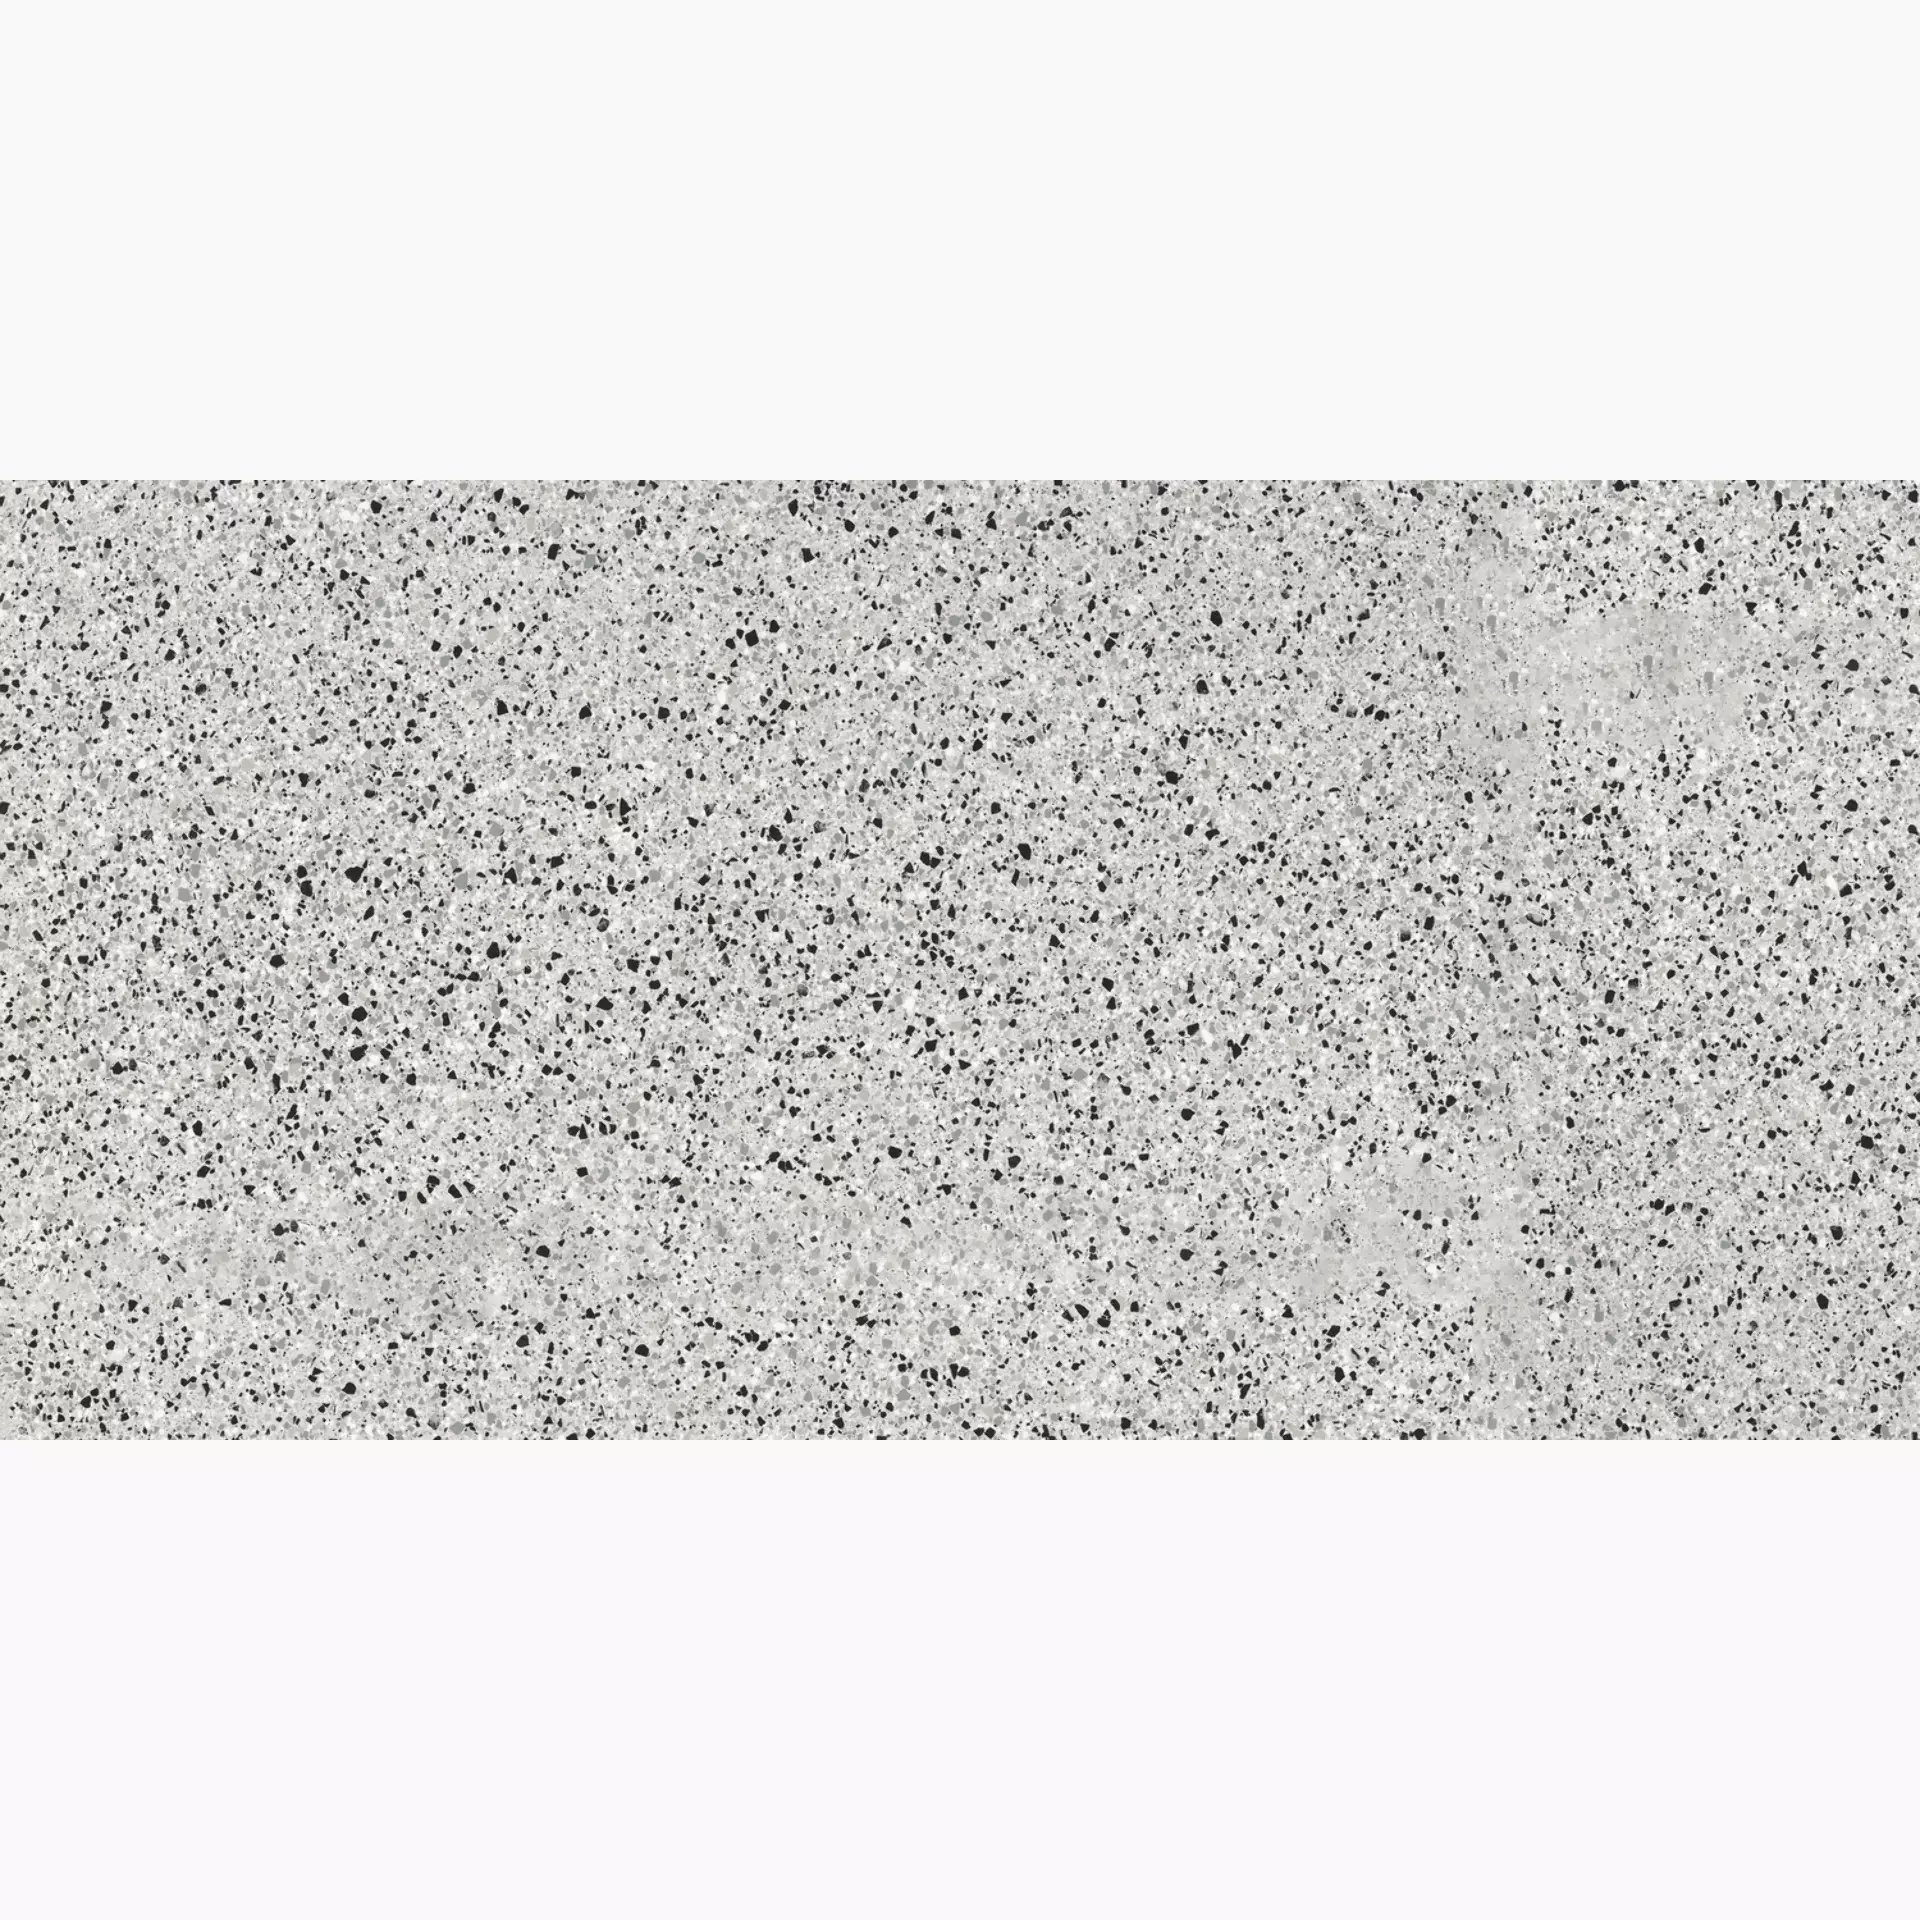 FMG Rialto Silver Naturale P175421 75x150cm rectified 10mm